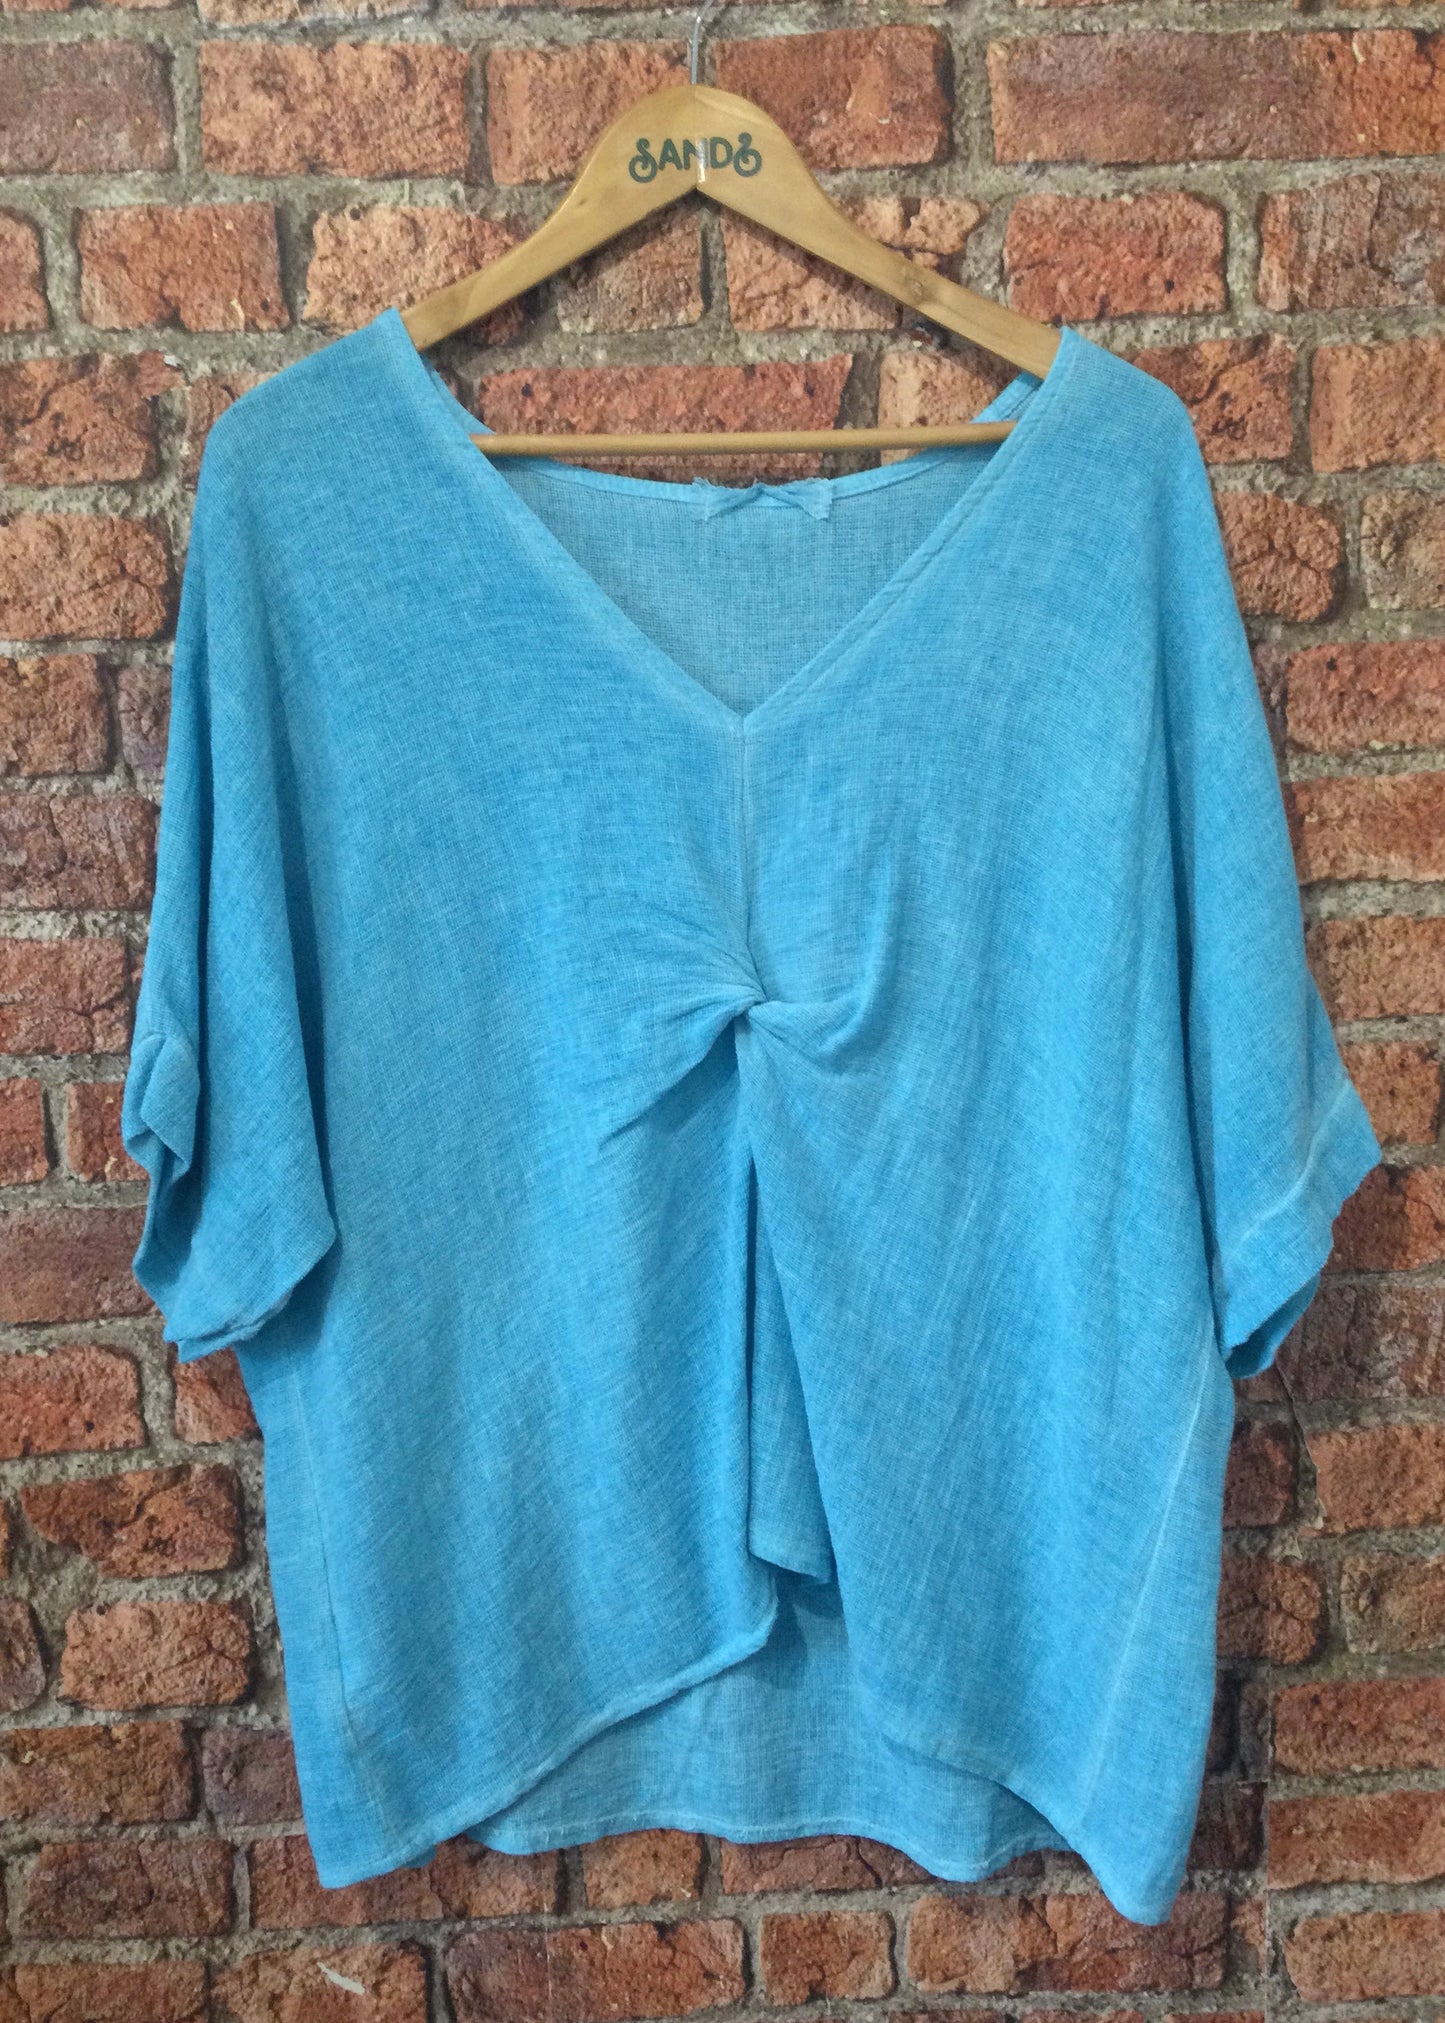 Sands - Washed Linen Ruched Top / Turquoise